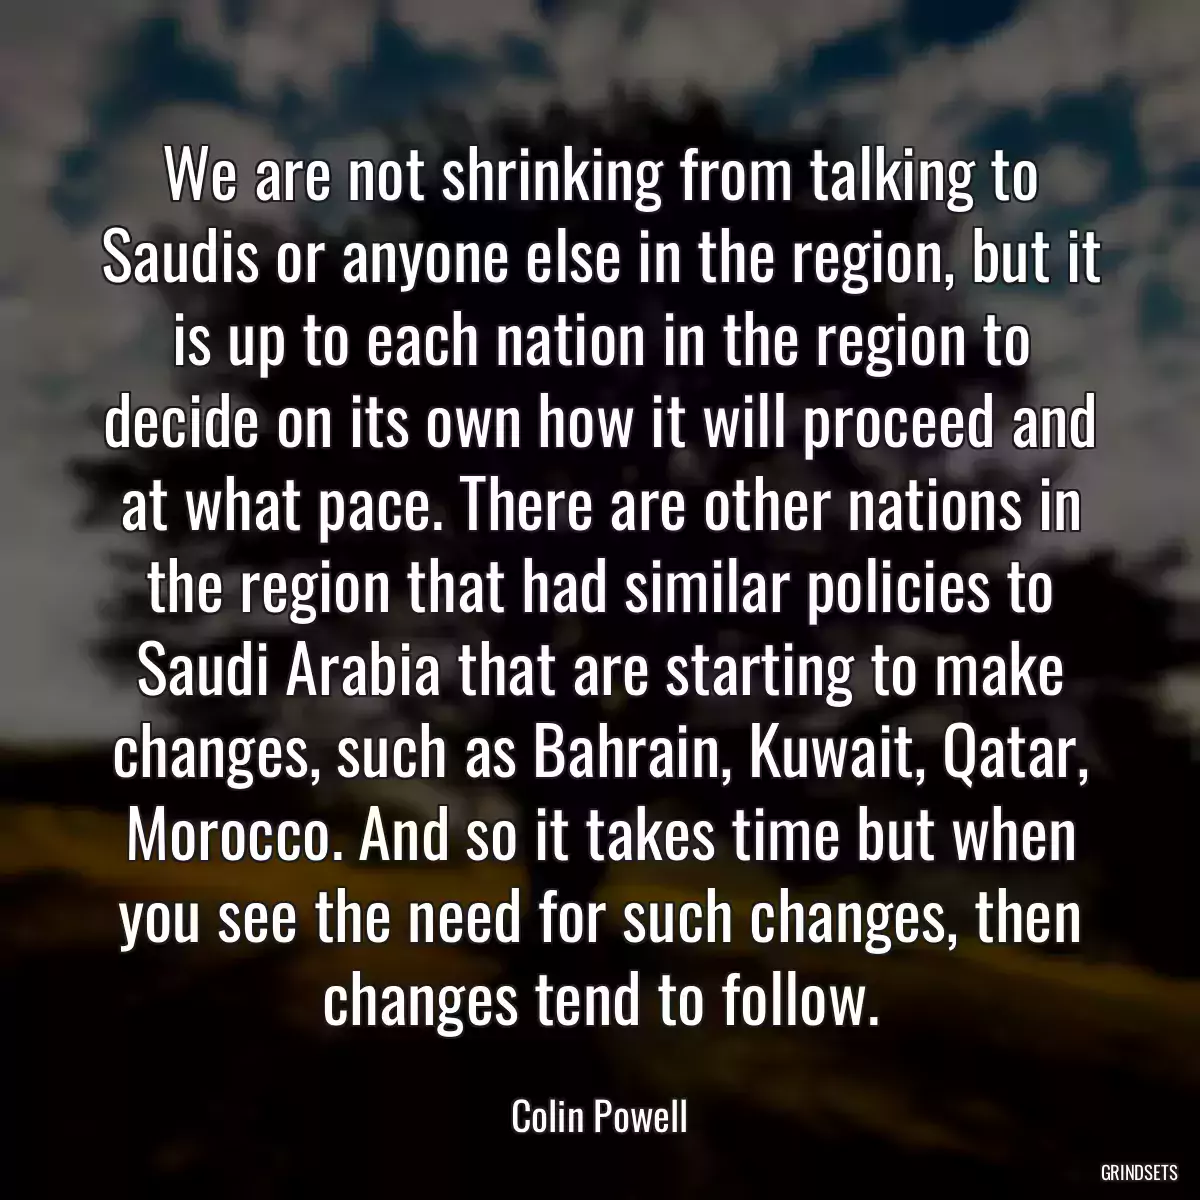 We are not shrinking from talking to Saudis or anyone else in the region, but it is up to each nation in the region to decide on its own how it will proceed and at what pace. There are other nations in the region that had similar policies to Saudi Arabia that are starting to make changes, such as Bahrain, Kuwait, Qatar, Morocco. And so it takes time but when you see the need for such changes, then changes tend to follow.